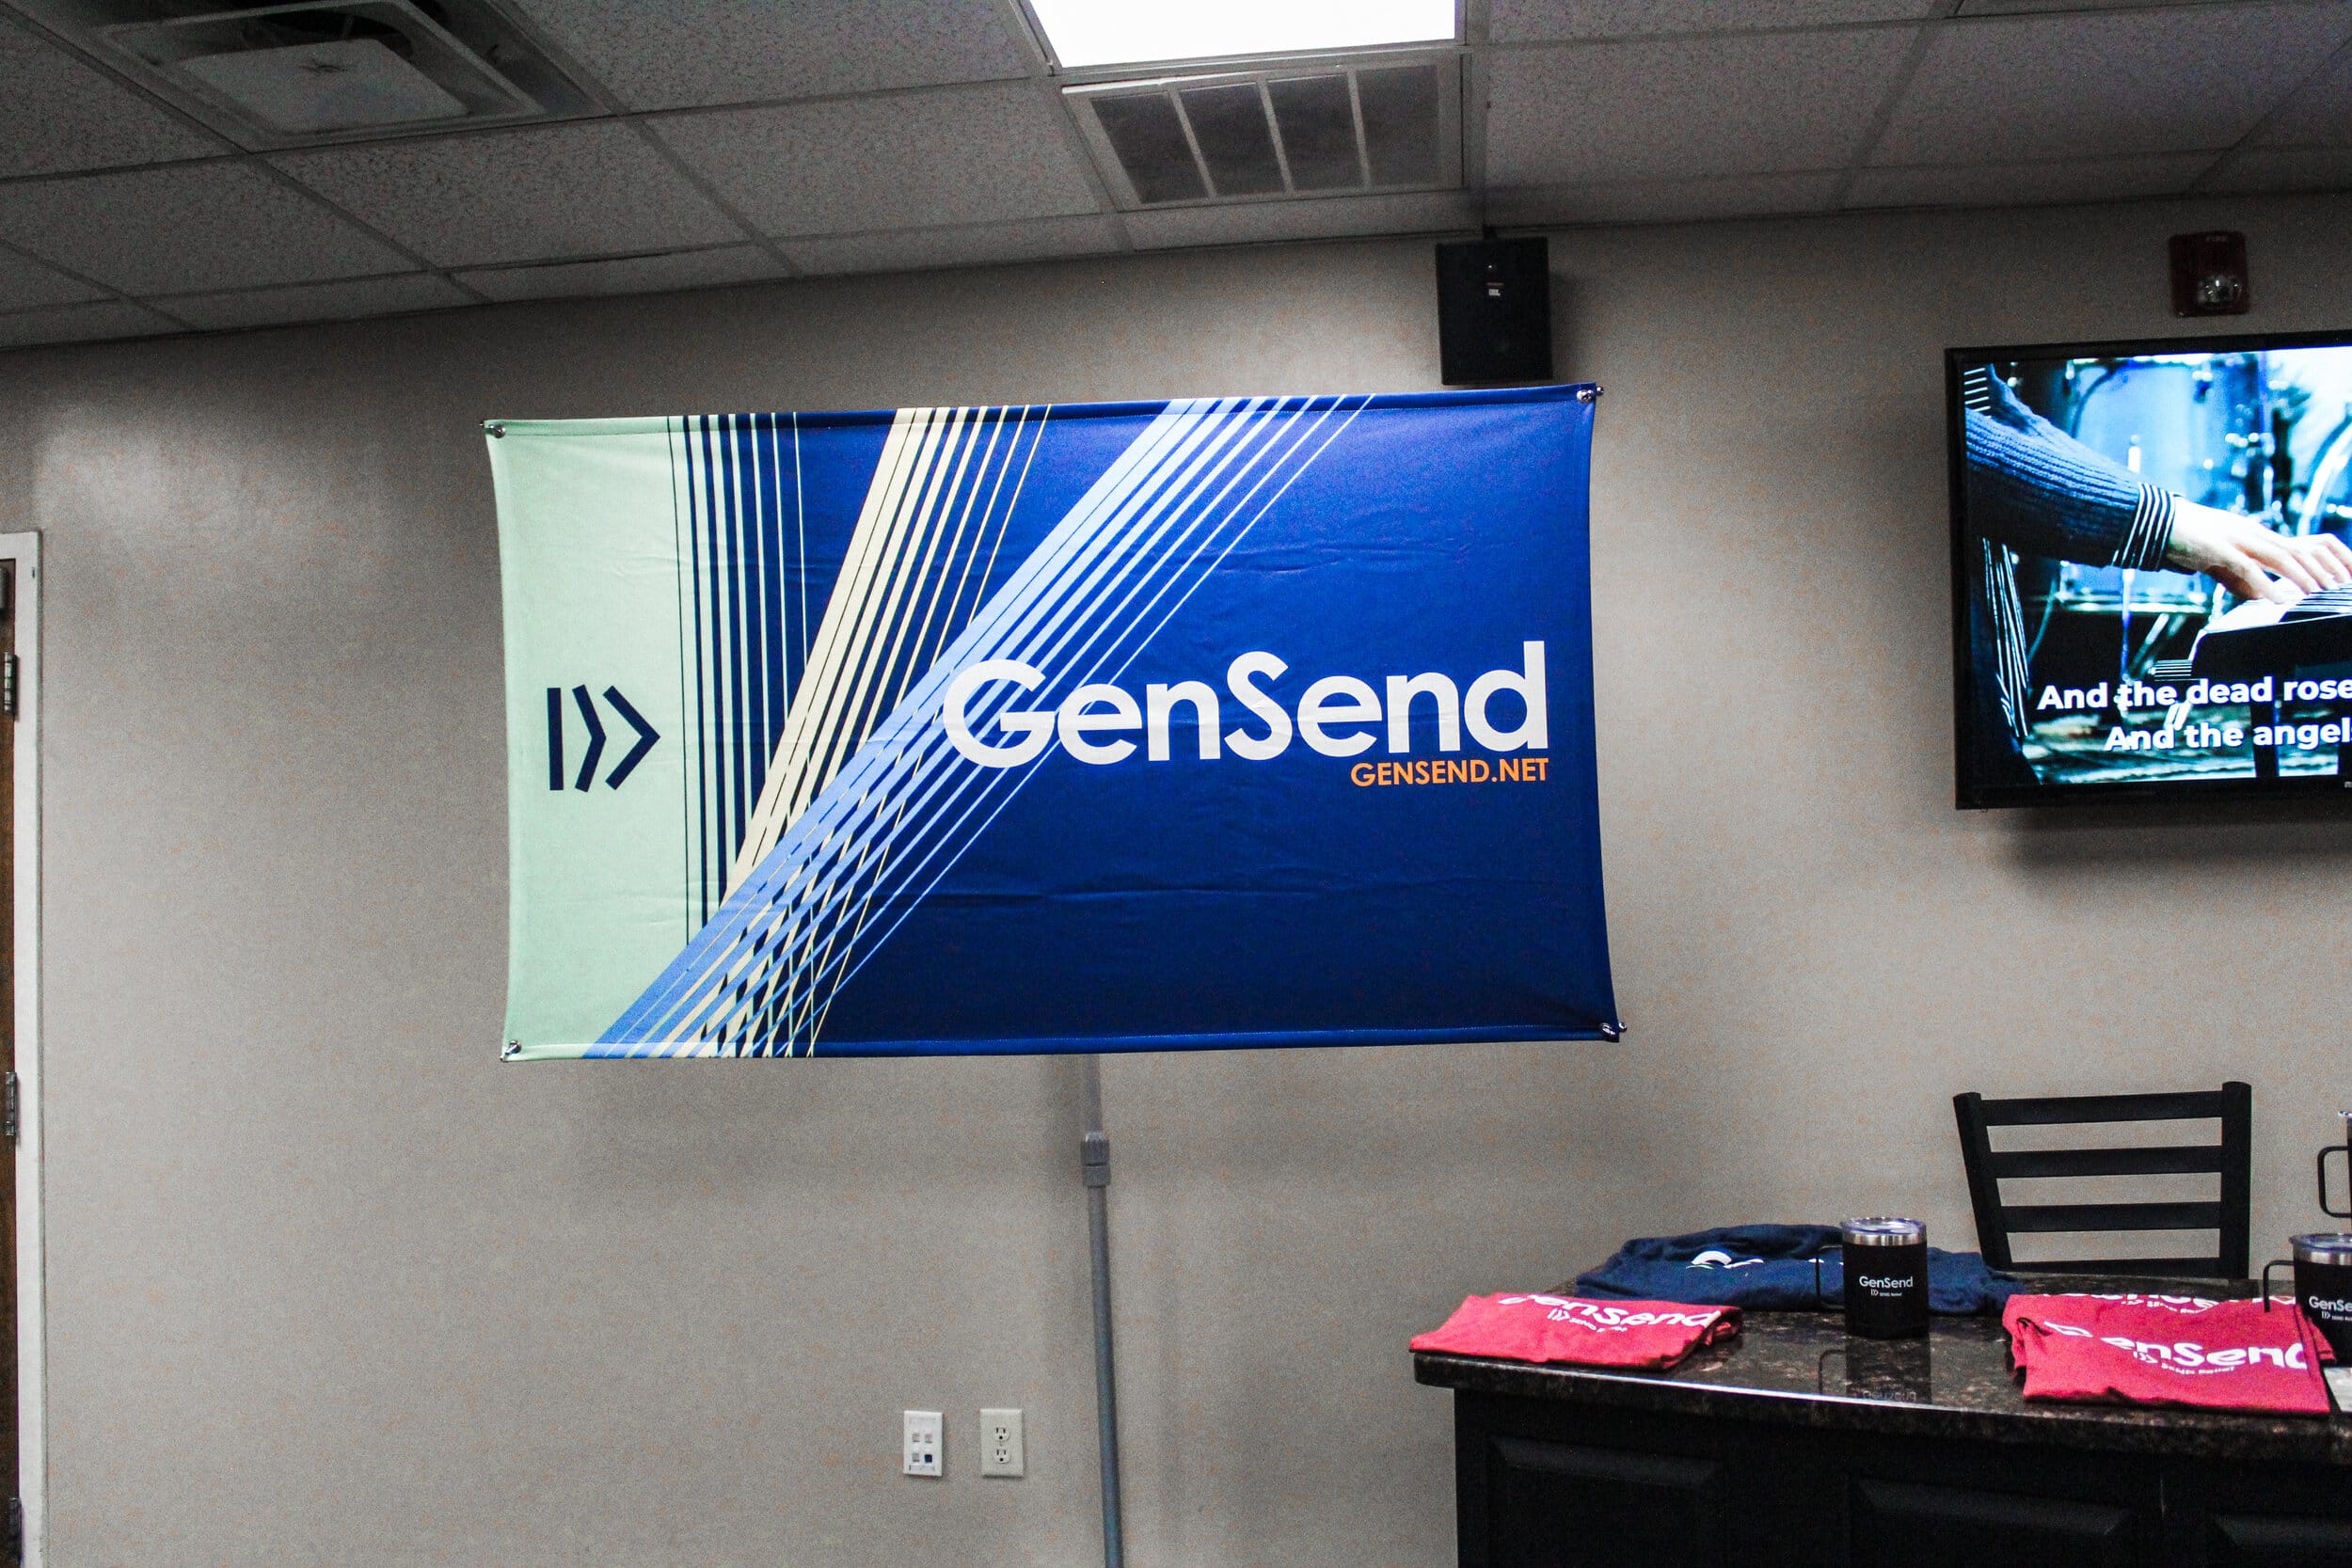 GenSend information set up for students to look into.